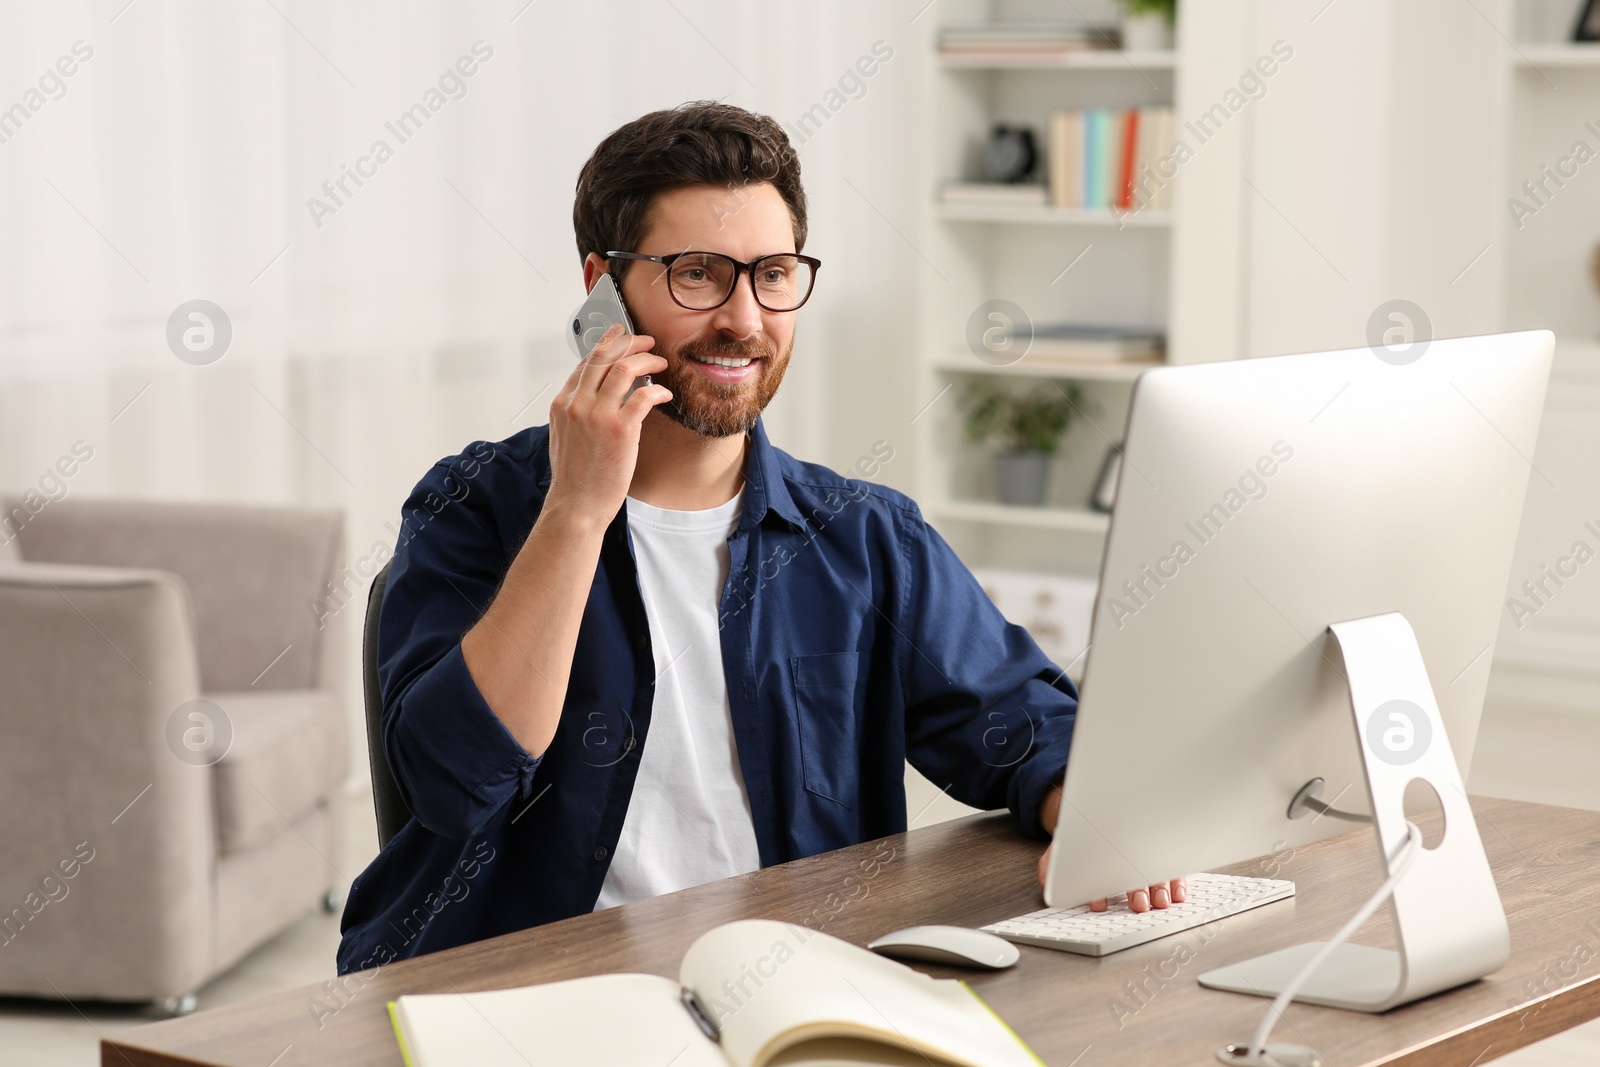 Photo of Home workplace. Happy man talking on smartphone while working with computer at wooden desk in room